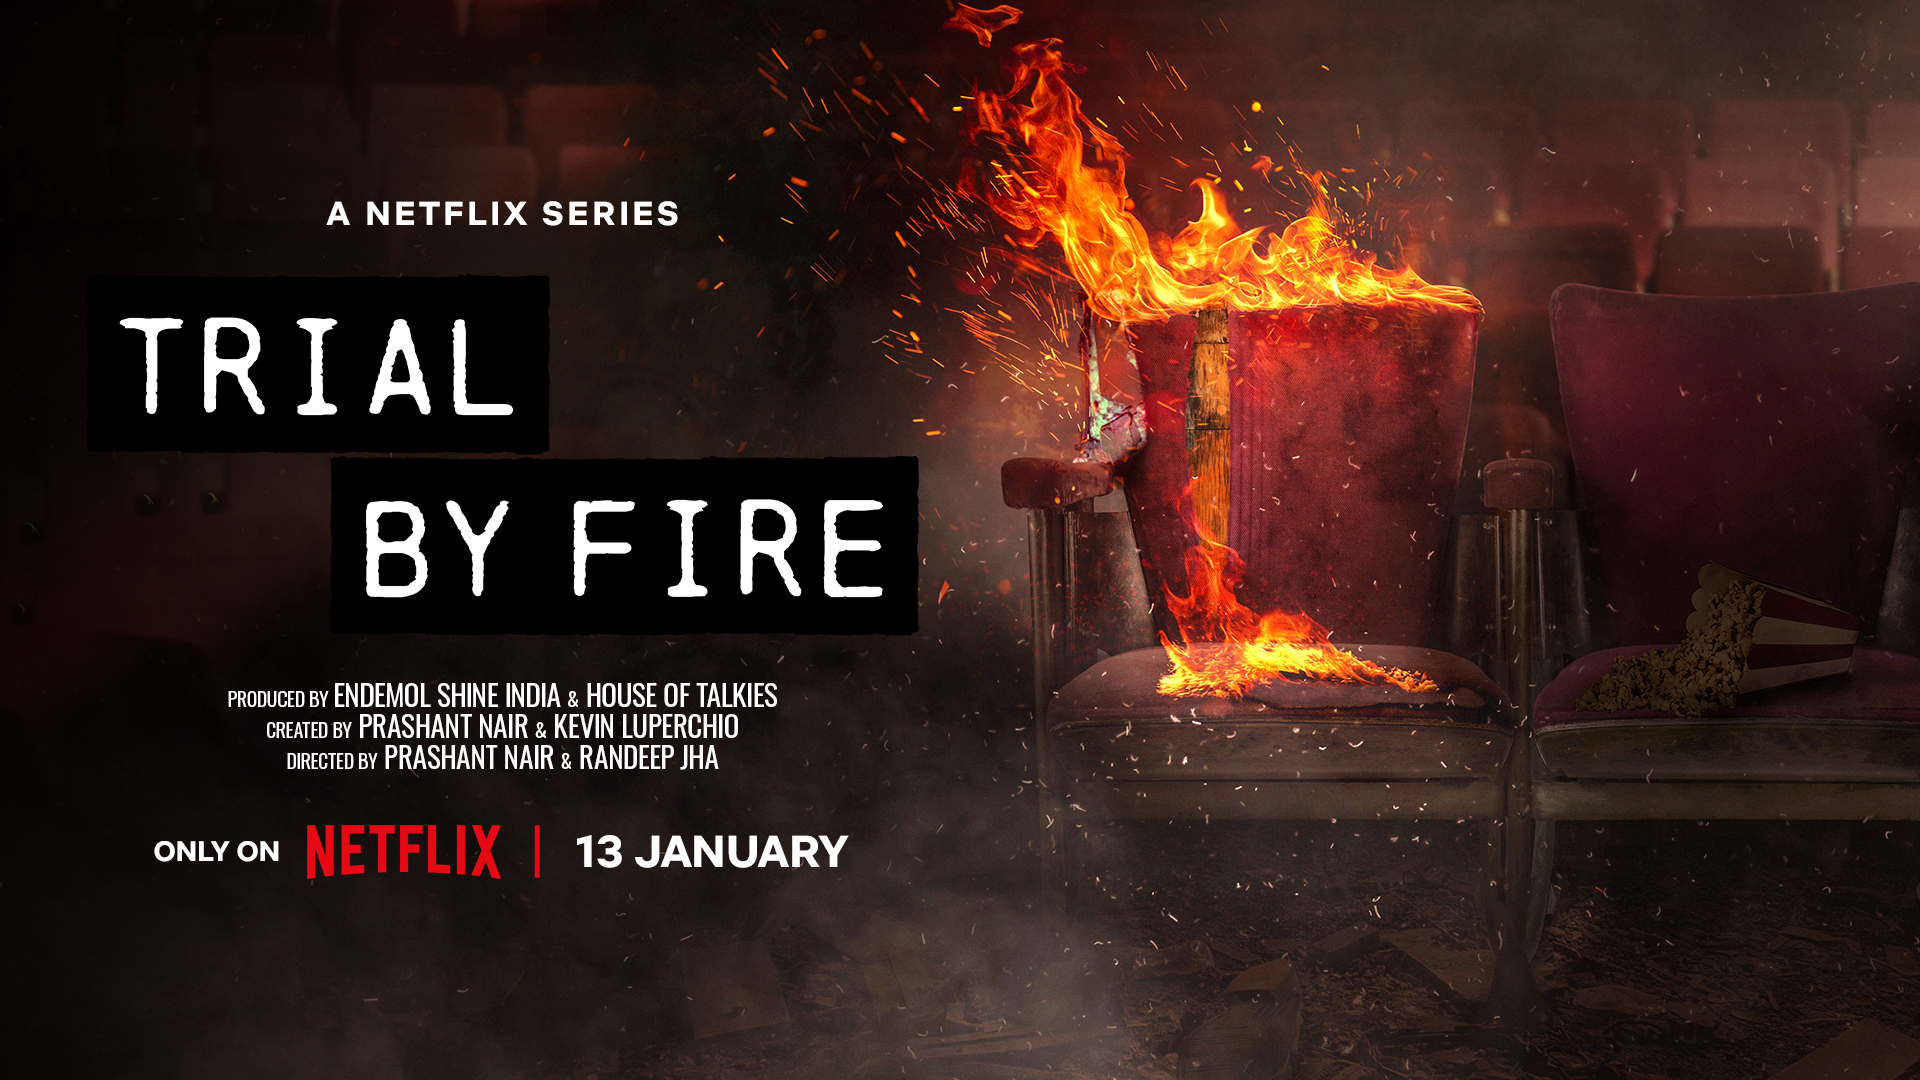 Netflix Announces Limited Series 'Trial By Fire' to Release January 13 -  About Netflix